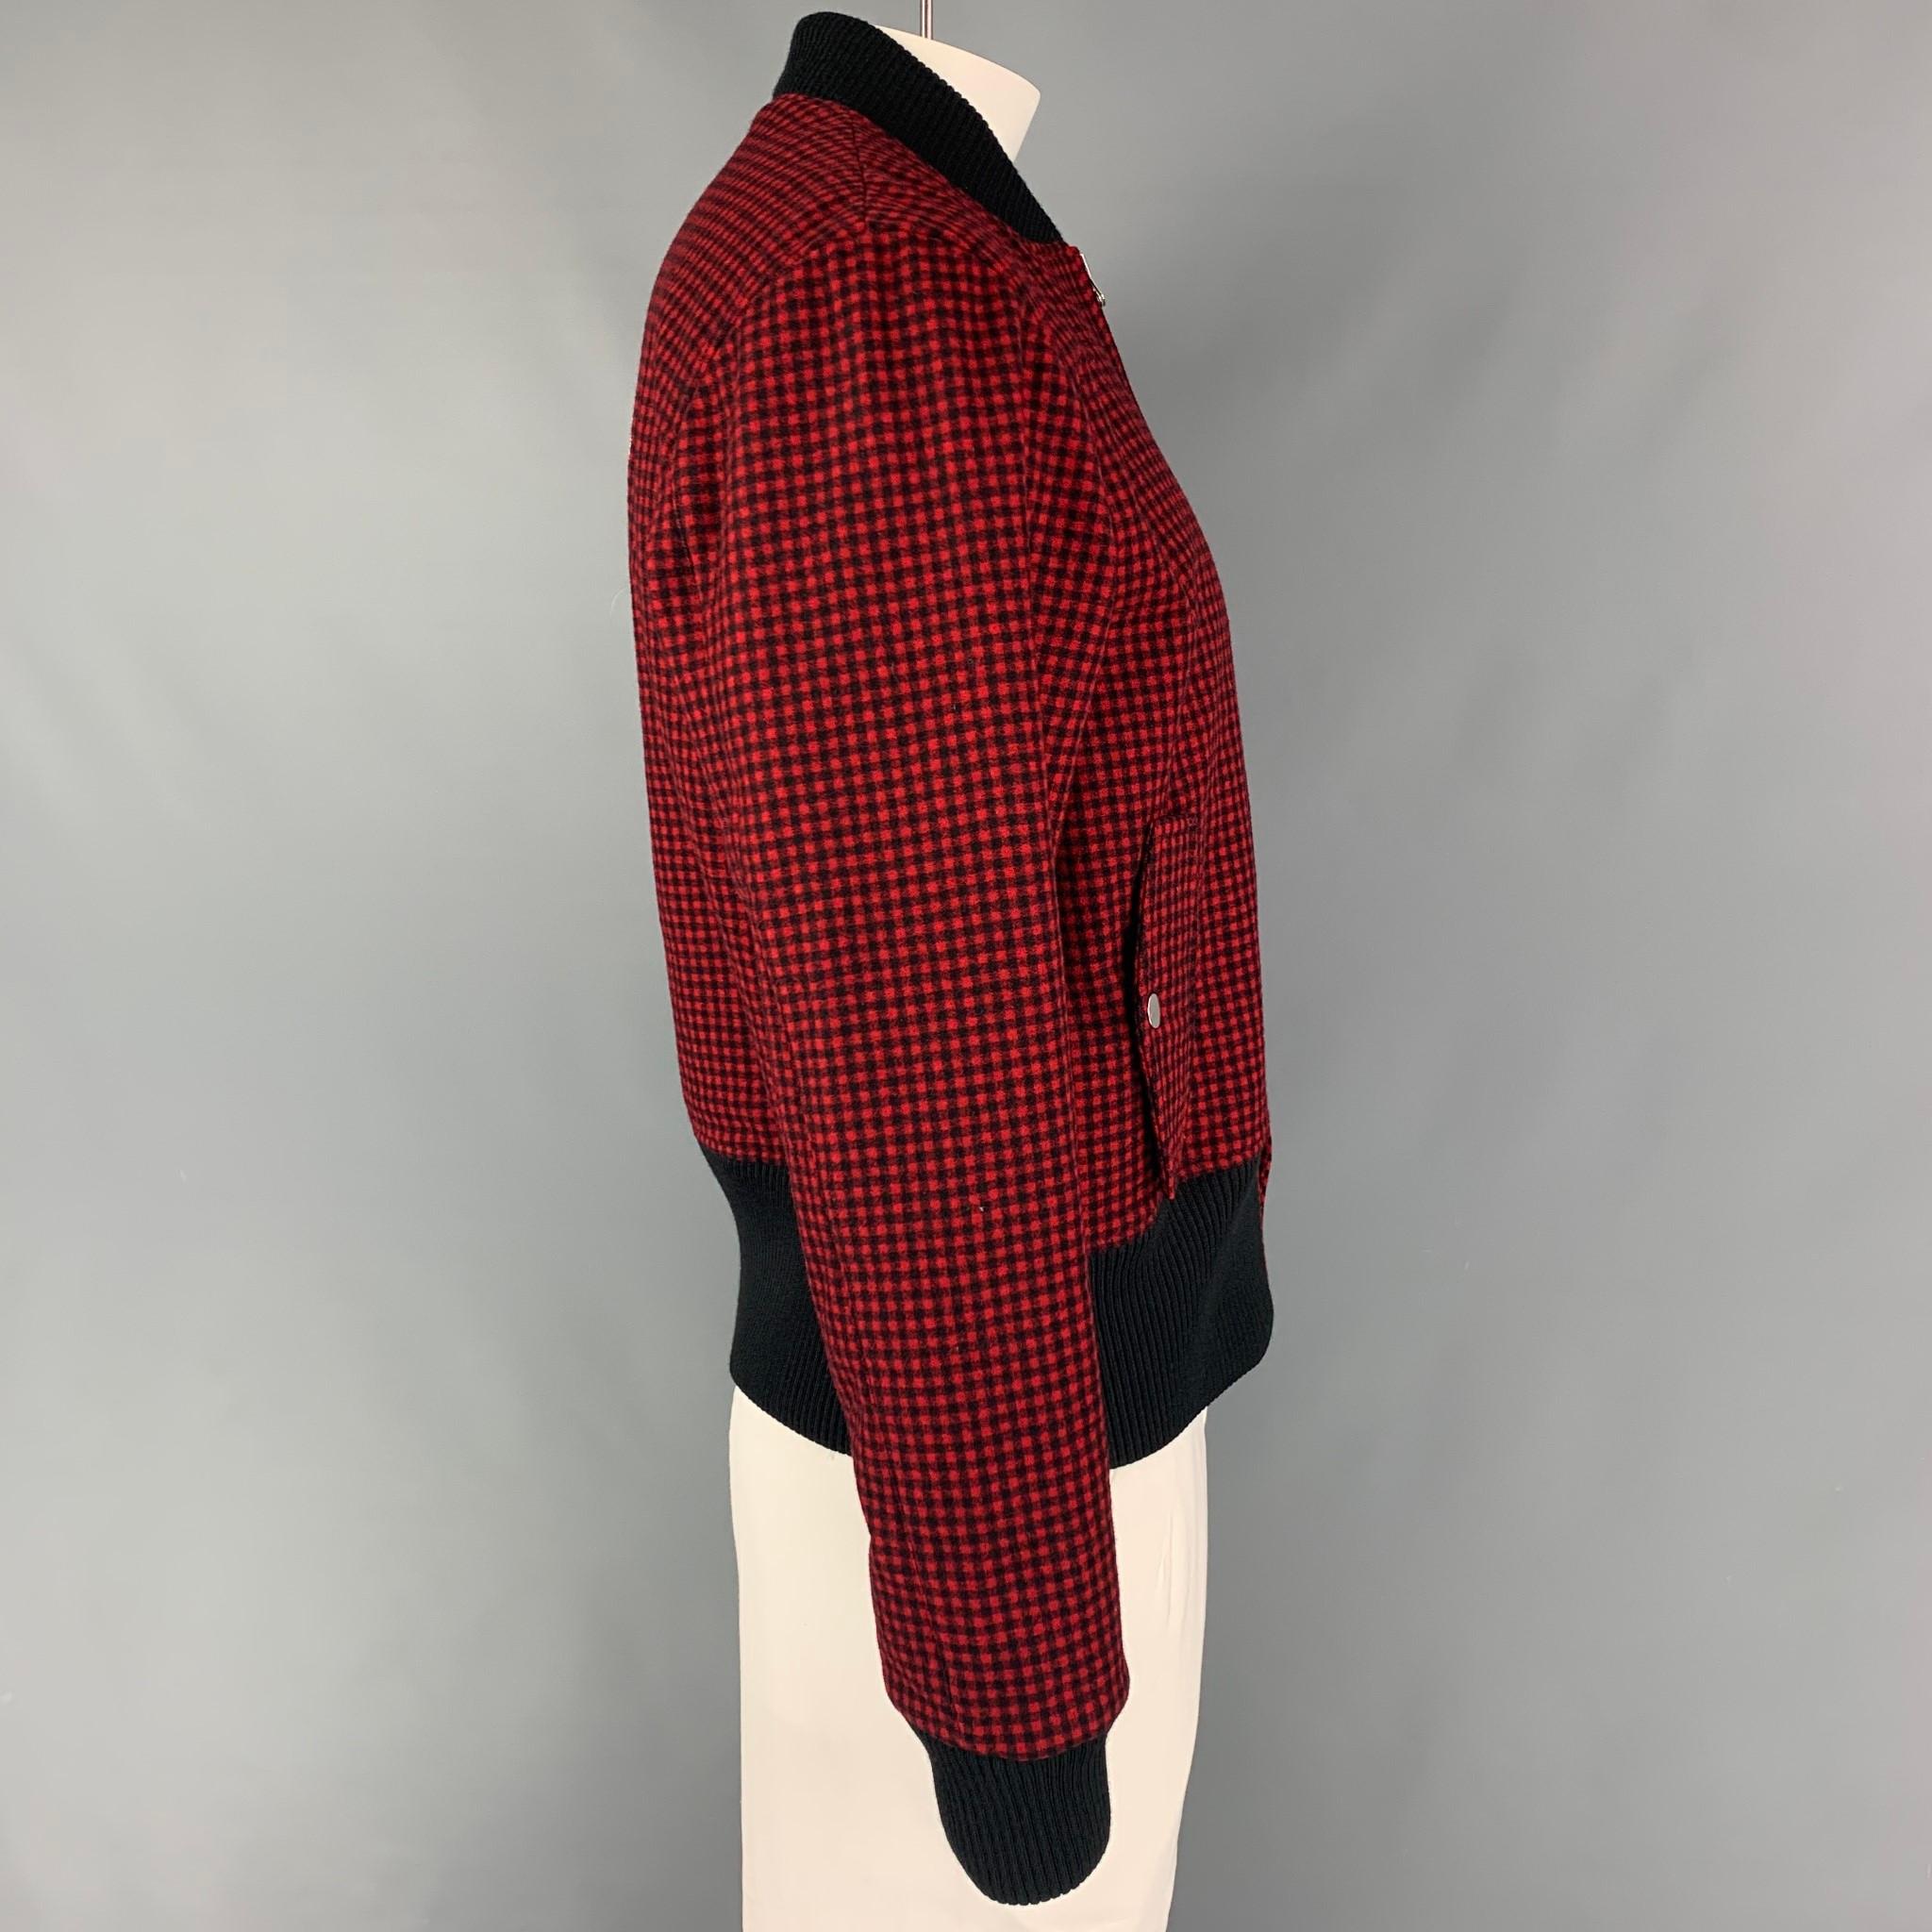 BAND OF OUTSIDERS jacket comes in a red & black checkered wool featuring a bomber style, ribbed hem, embroidered back design, flap pockets, and a zip up closure.

Excellent Pre-Owned Condition. Fabric tag removed.
Marked: Size tag